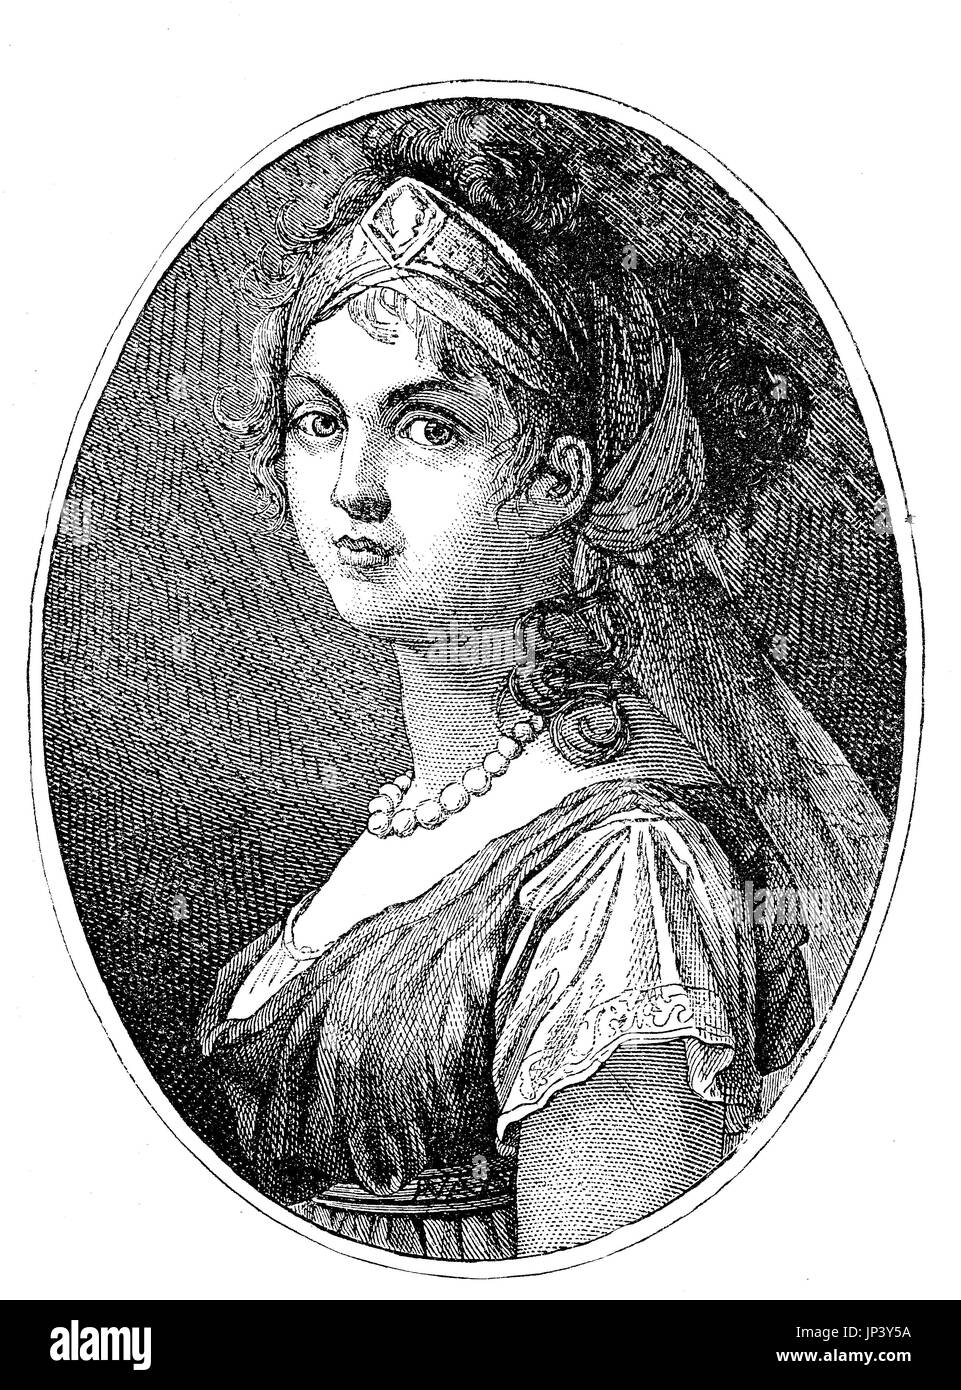 Duchess Louise of Mecklenburg-Strelitz, Luise Auguste Wilhelmine Amalie,  10 March 1776 - 19 July 1810, was Queen consort of Prussia as the wife of King Frederick William III., Germany, digital improved reproduction of a woodcut publication from the year 1888 Stock Photo